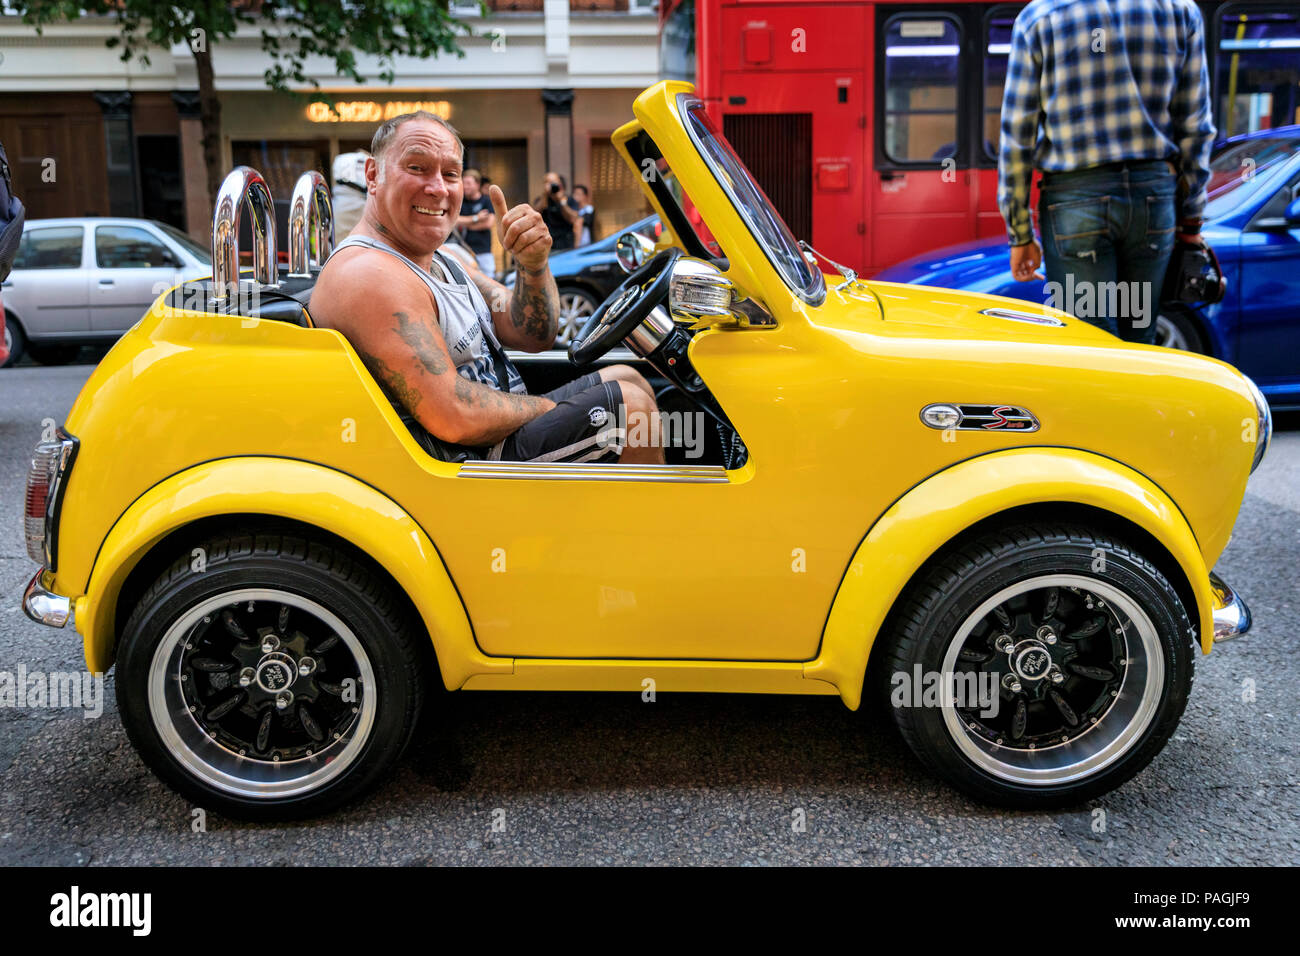 Sloane Street, London, UK, 20th July 2018. A 'cut-down' Mini in bright yellow, complete with smiling owner and a Mr. Bean on the dashboard, steals the show and is clearly popular. Supercars, high-performance and classic cars, as well as some characterful adaptions, line up and drive along Sloane Street for Supercar Sunday, which sees around 400 cars attending. The meetup is organised by Surrey Car Meet and on social media. Stock Photo